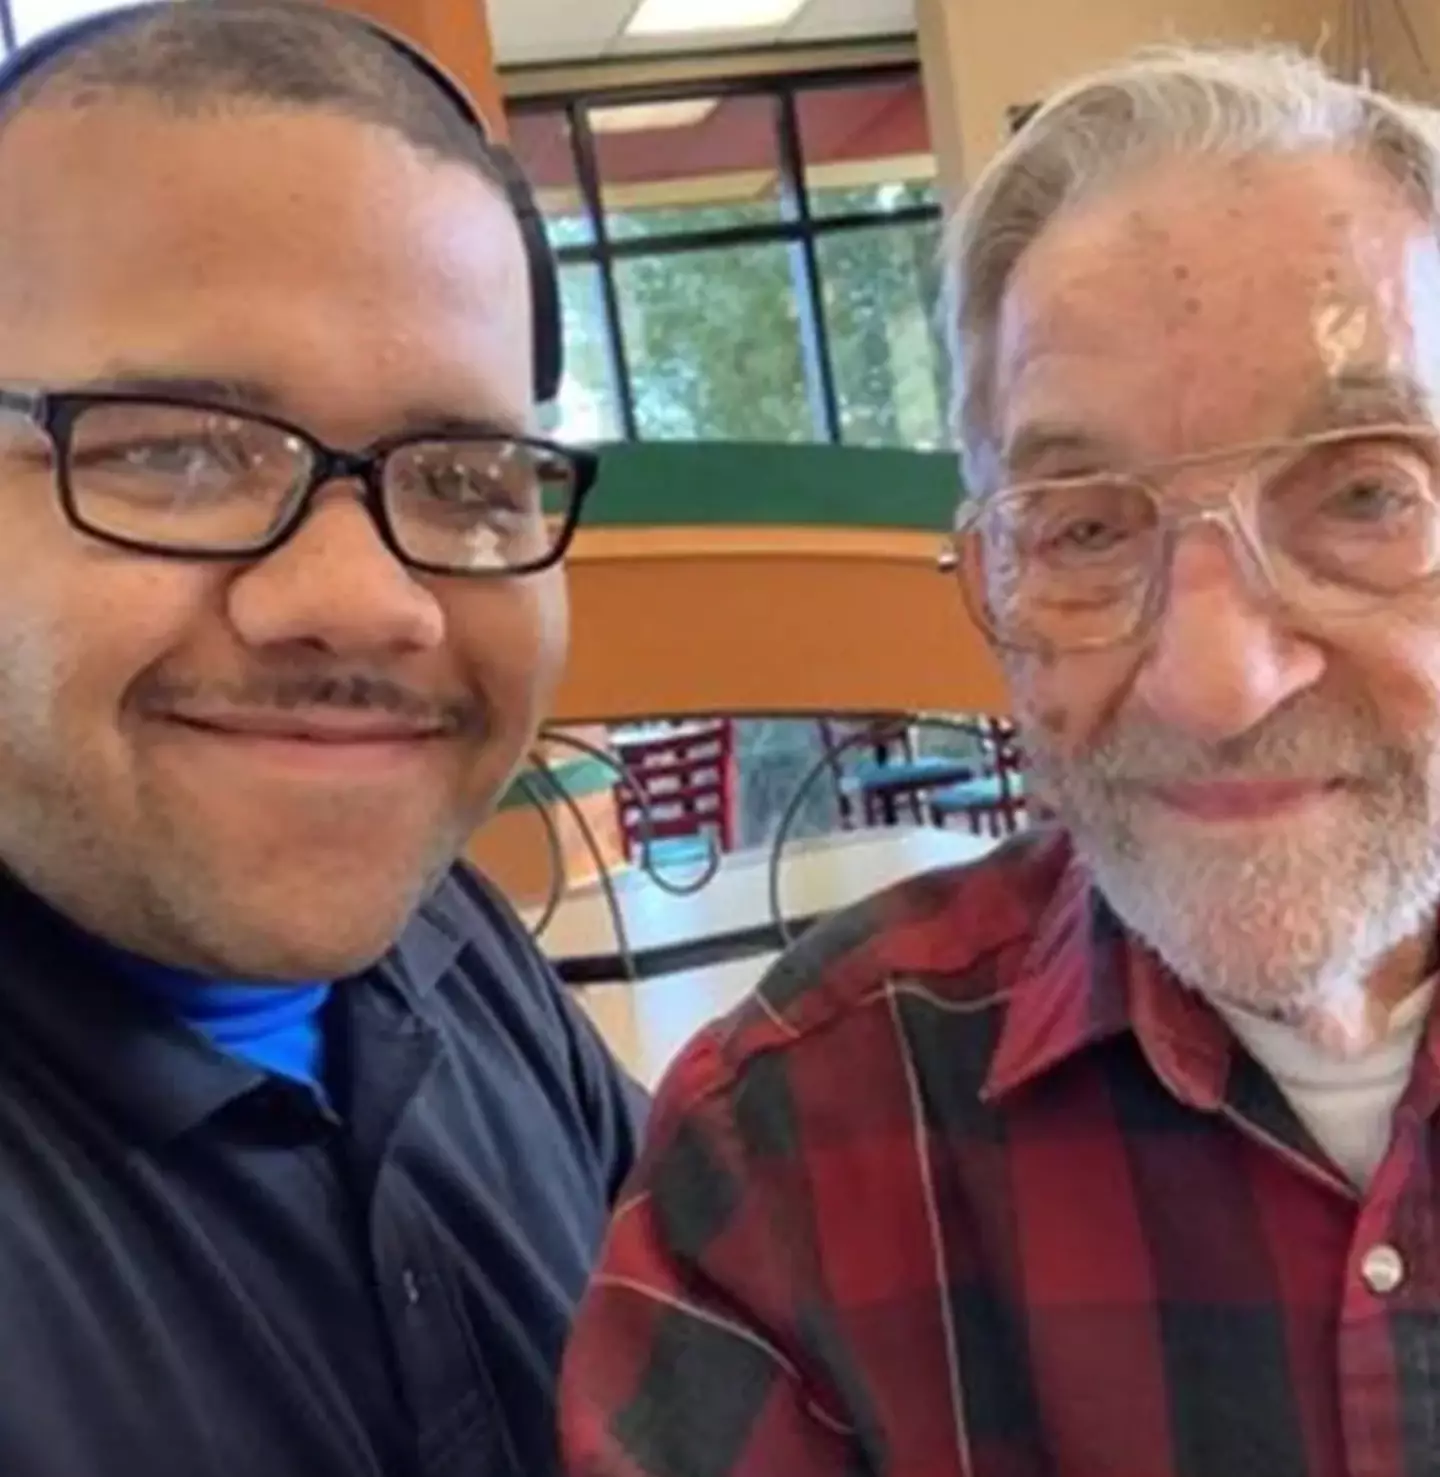 Arby's has awarded a 98-year-old WWII veteran with no family free food for life.